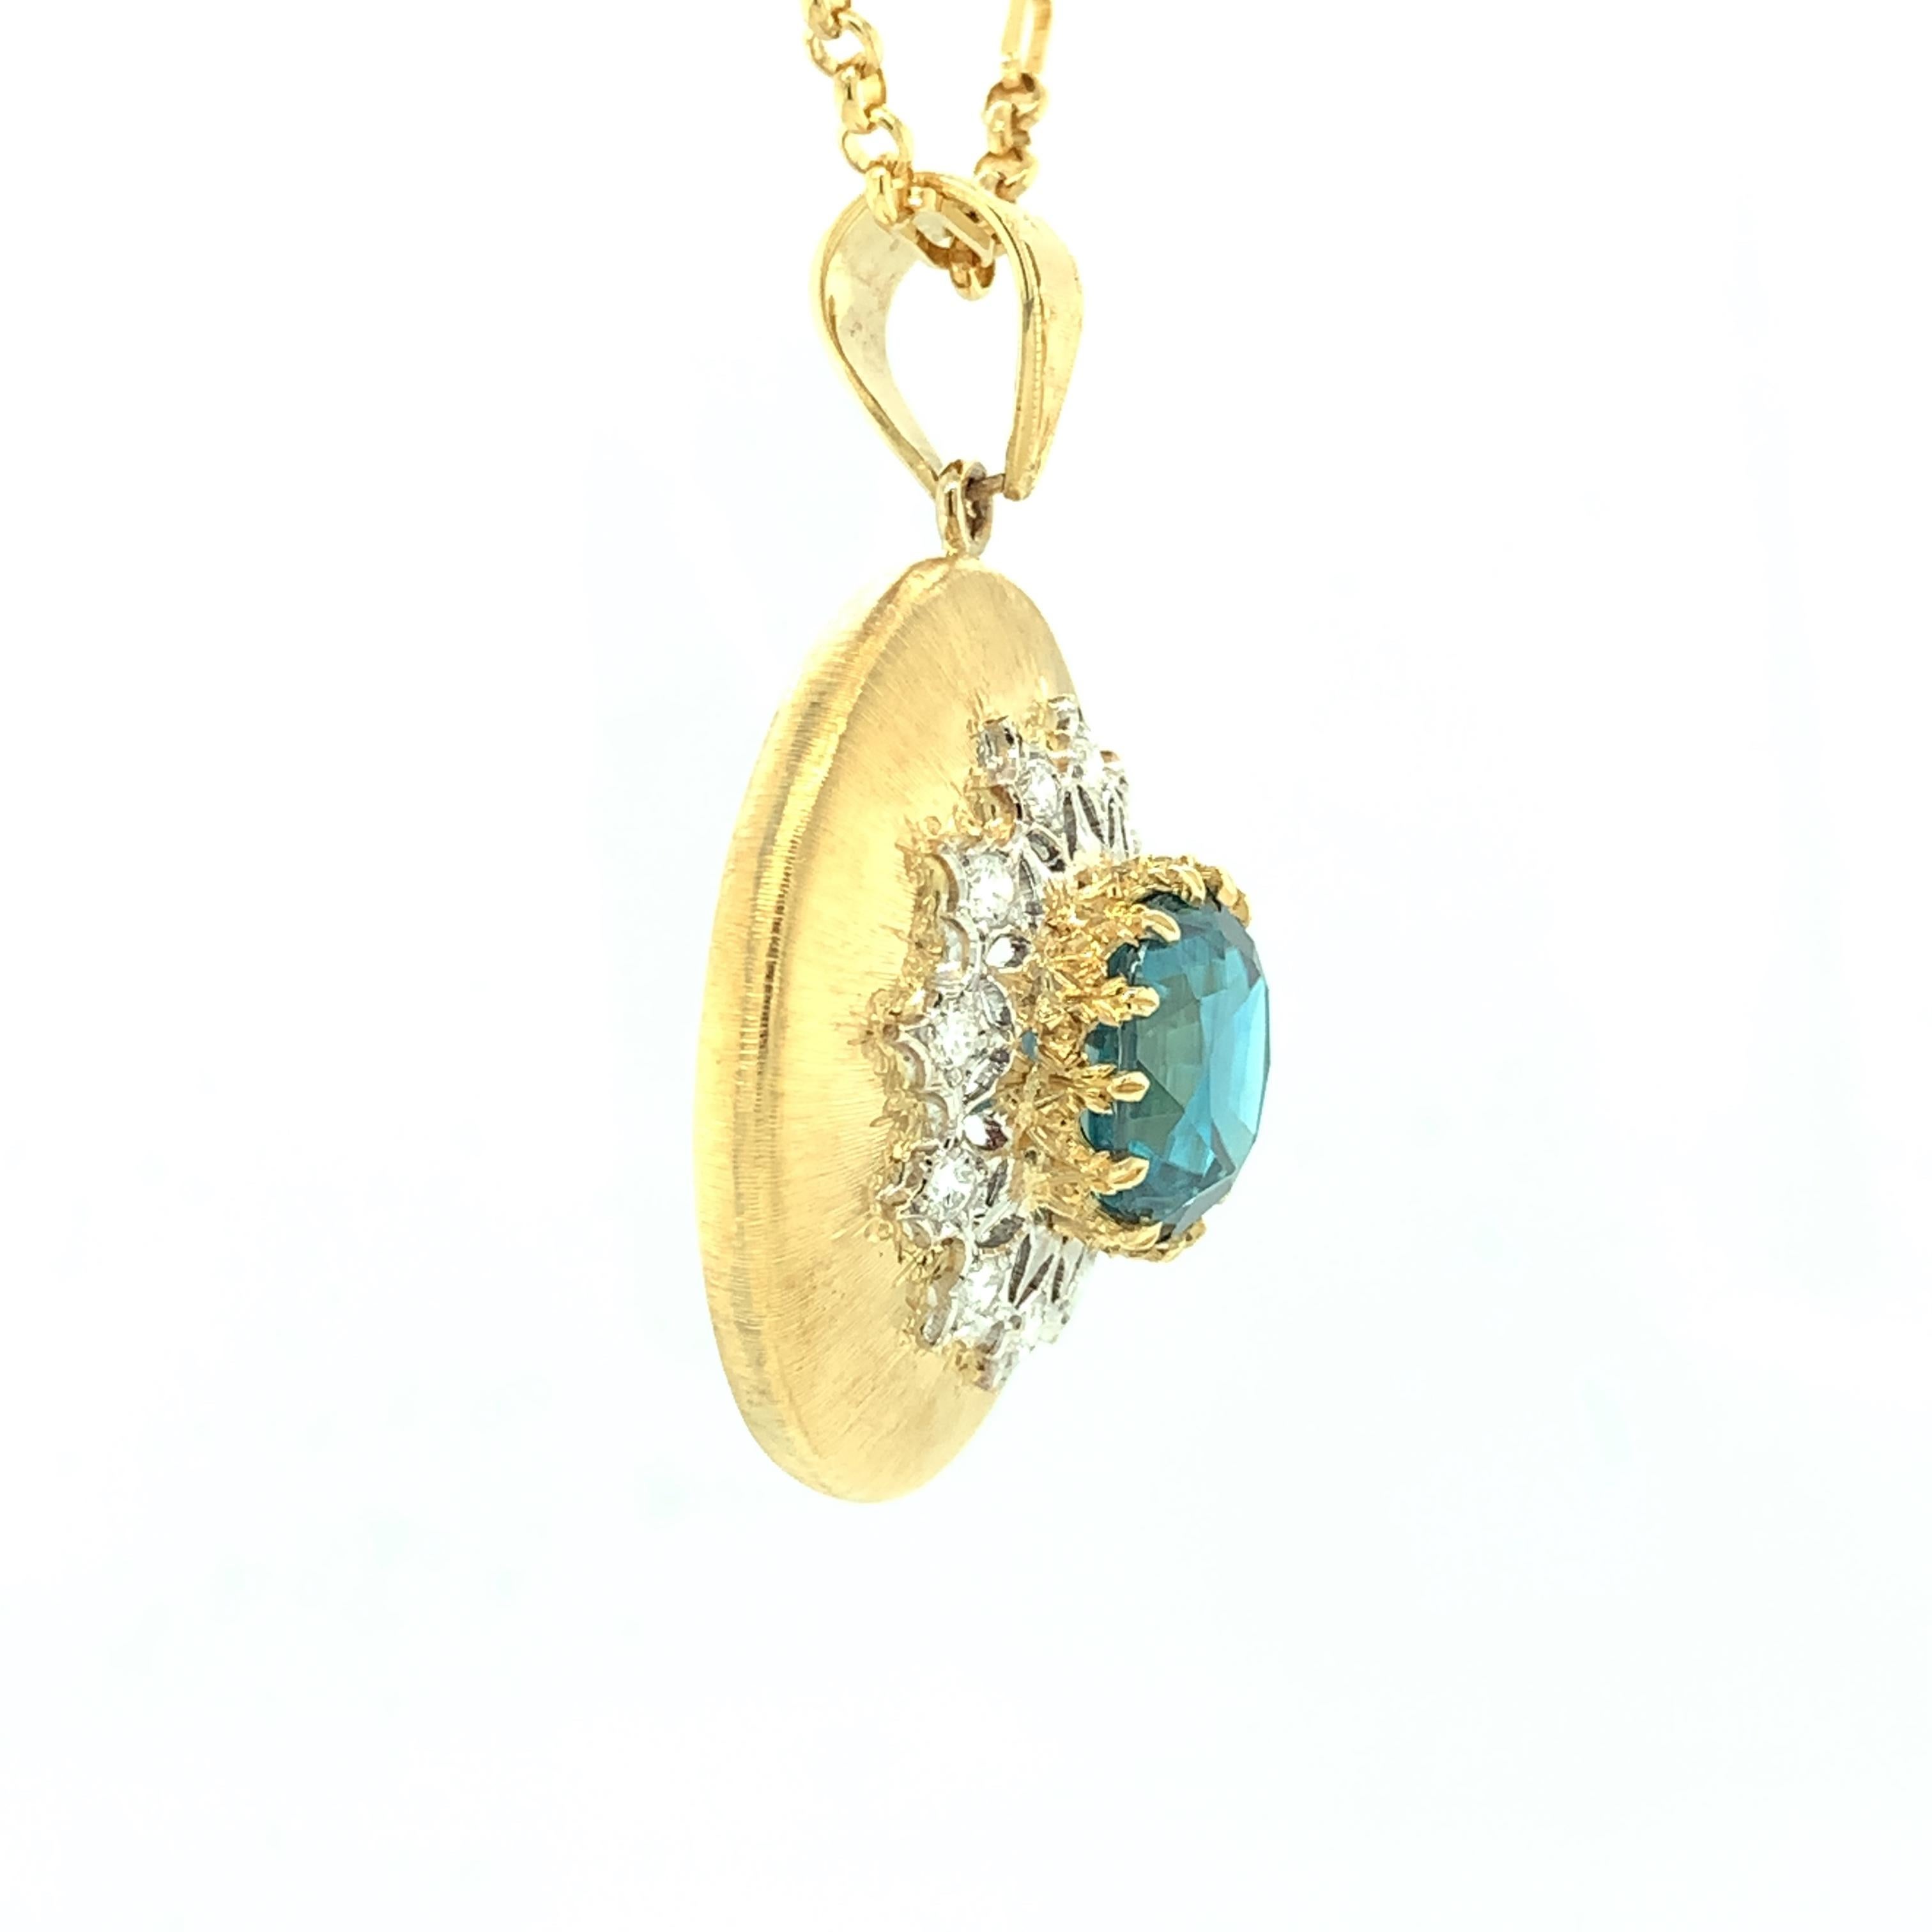 Elegance is the first word that comes to mind when looking at this gorgeous blue zircon and diamond pendant. A round, vivid blue zircon sits front and center, surrounded by brilliant cut white diamonds in this Florentine inspired piece. Handmade in